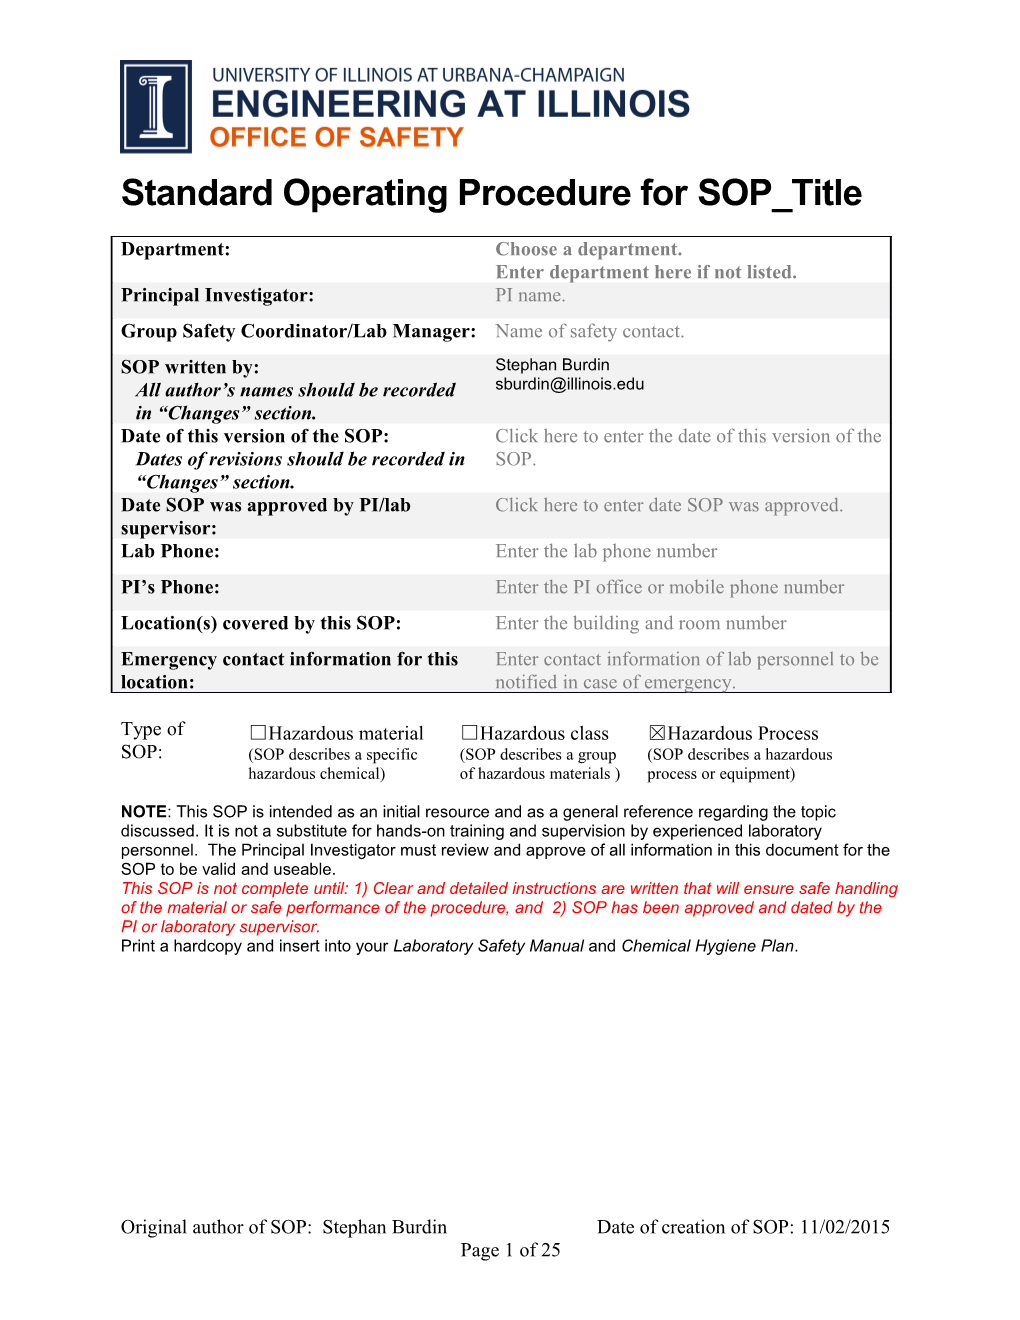 Standard Operating Procedure for Laboratory Tube Furnaces